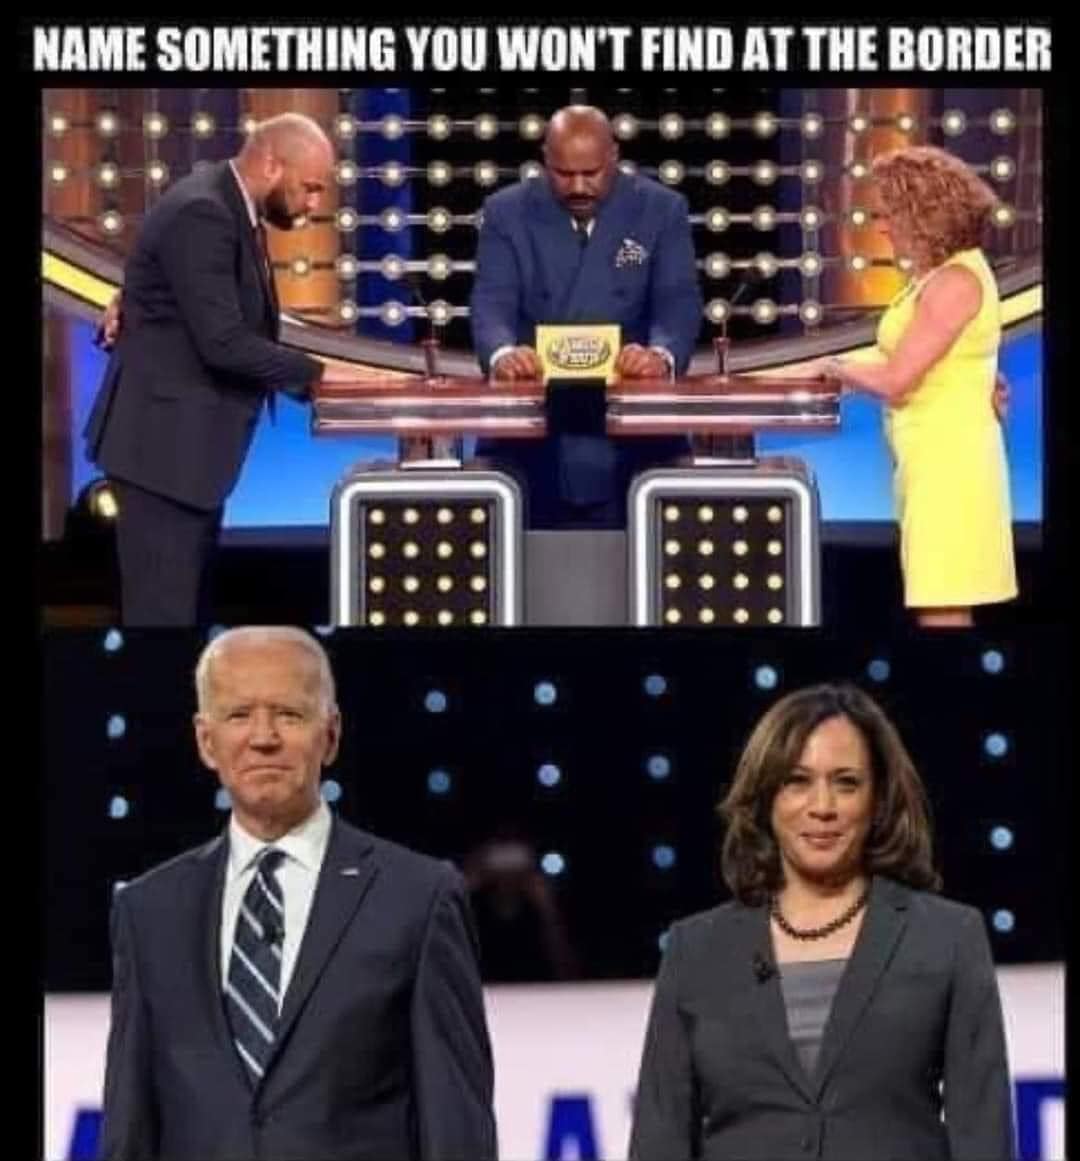 Name something you won’t find at the border?